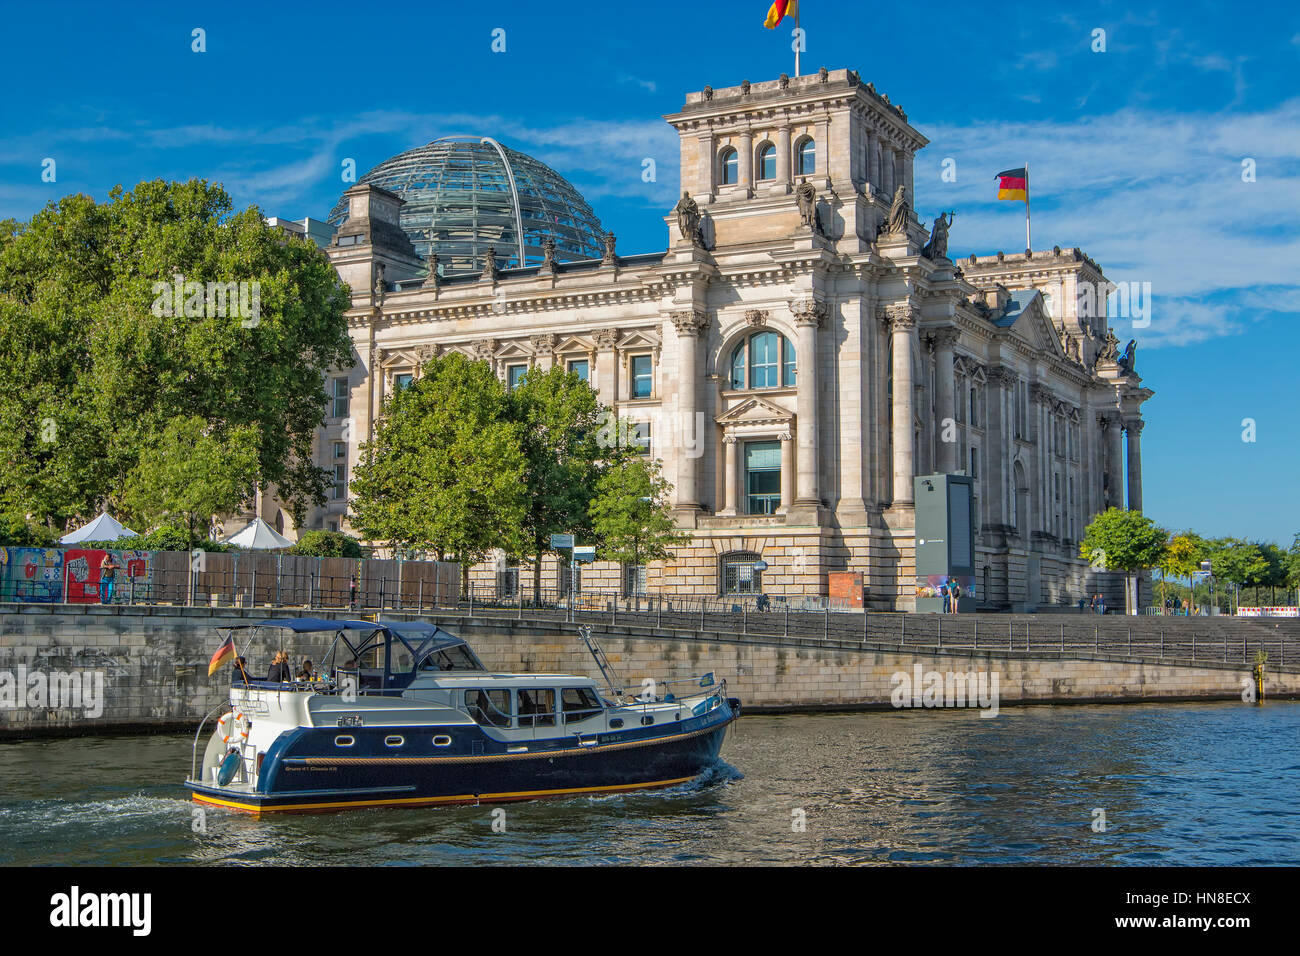 The Reichstag building and Spree river in Berlin Stock Photo